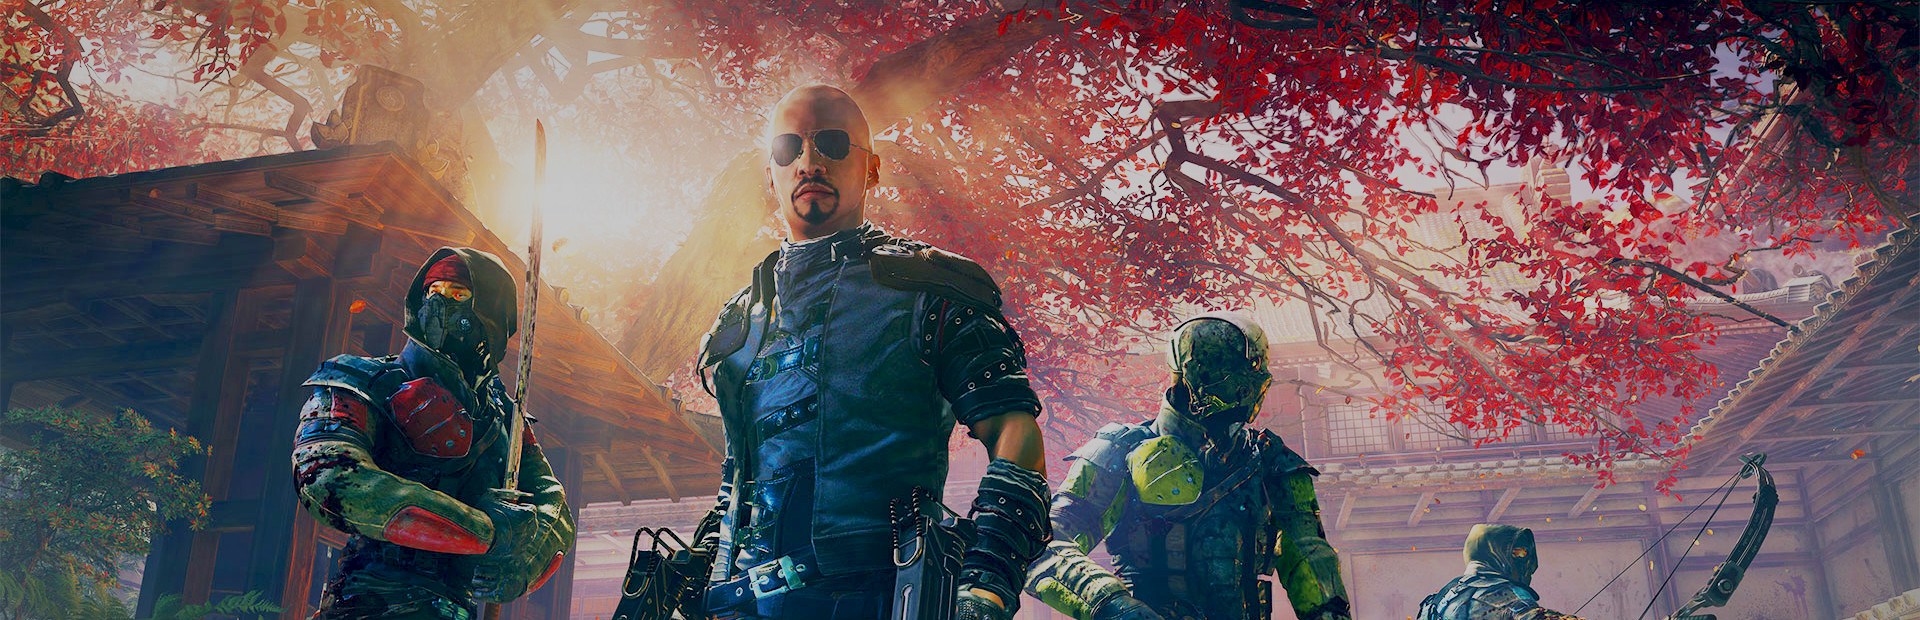 Shadow Warrior 2 cover image